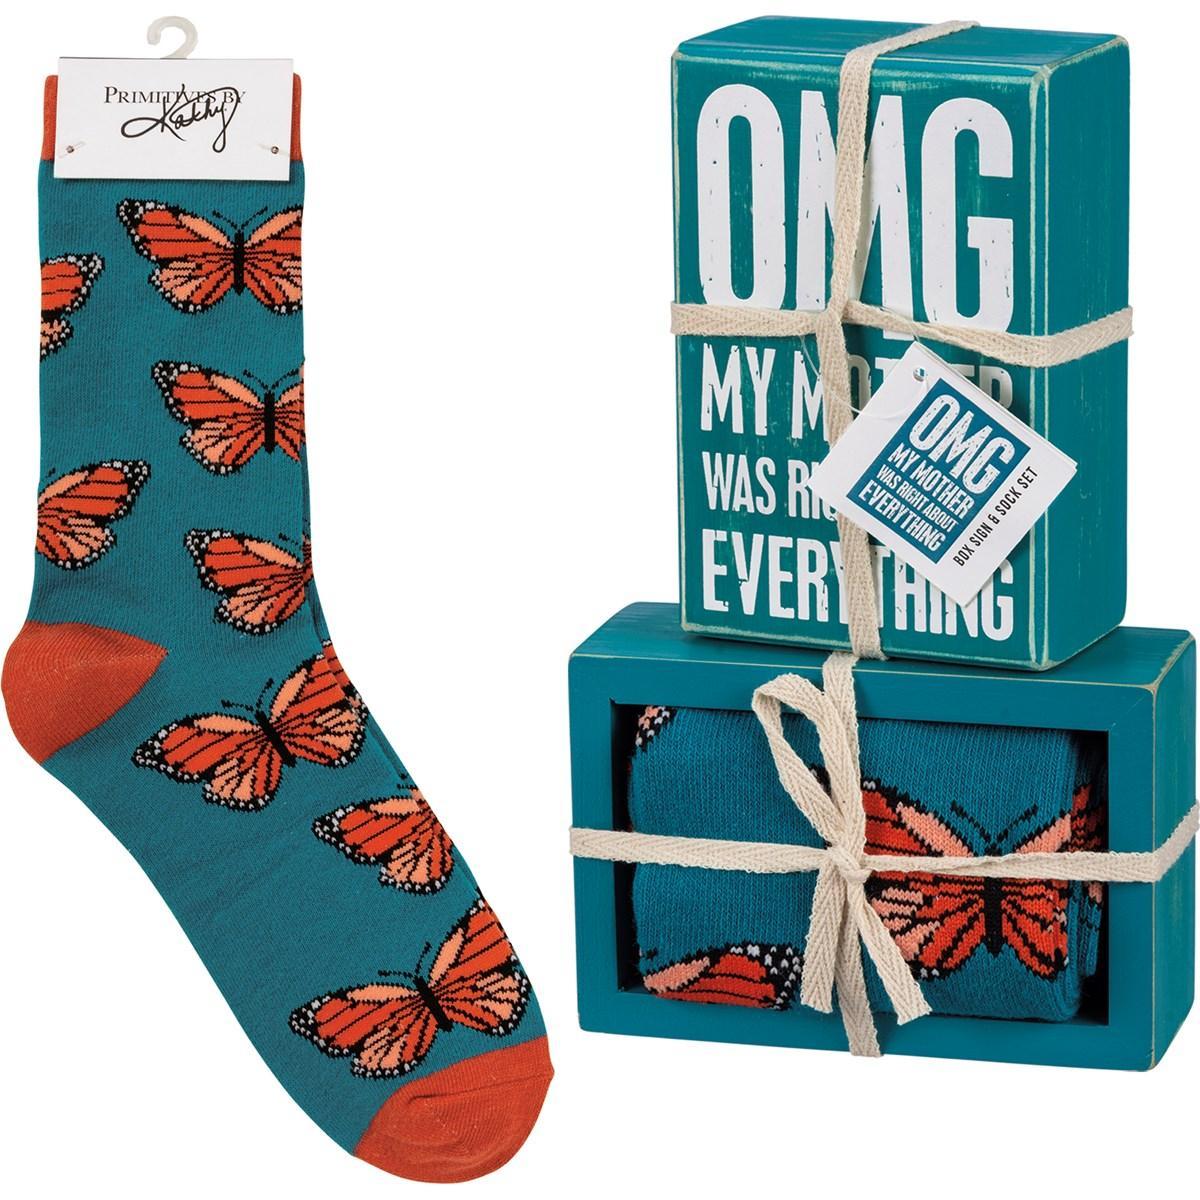 OMG My Mother Was Right Box Sign & Socks